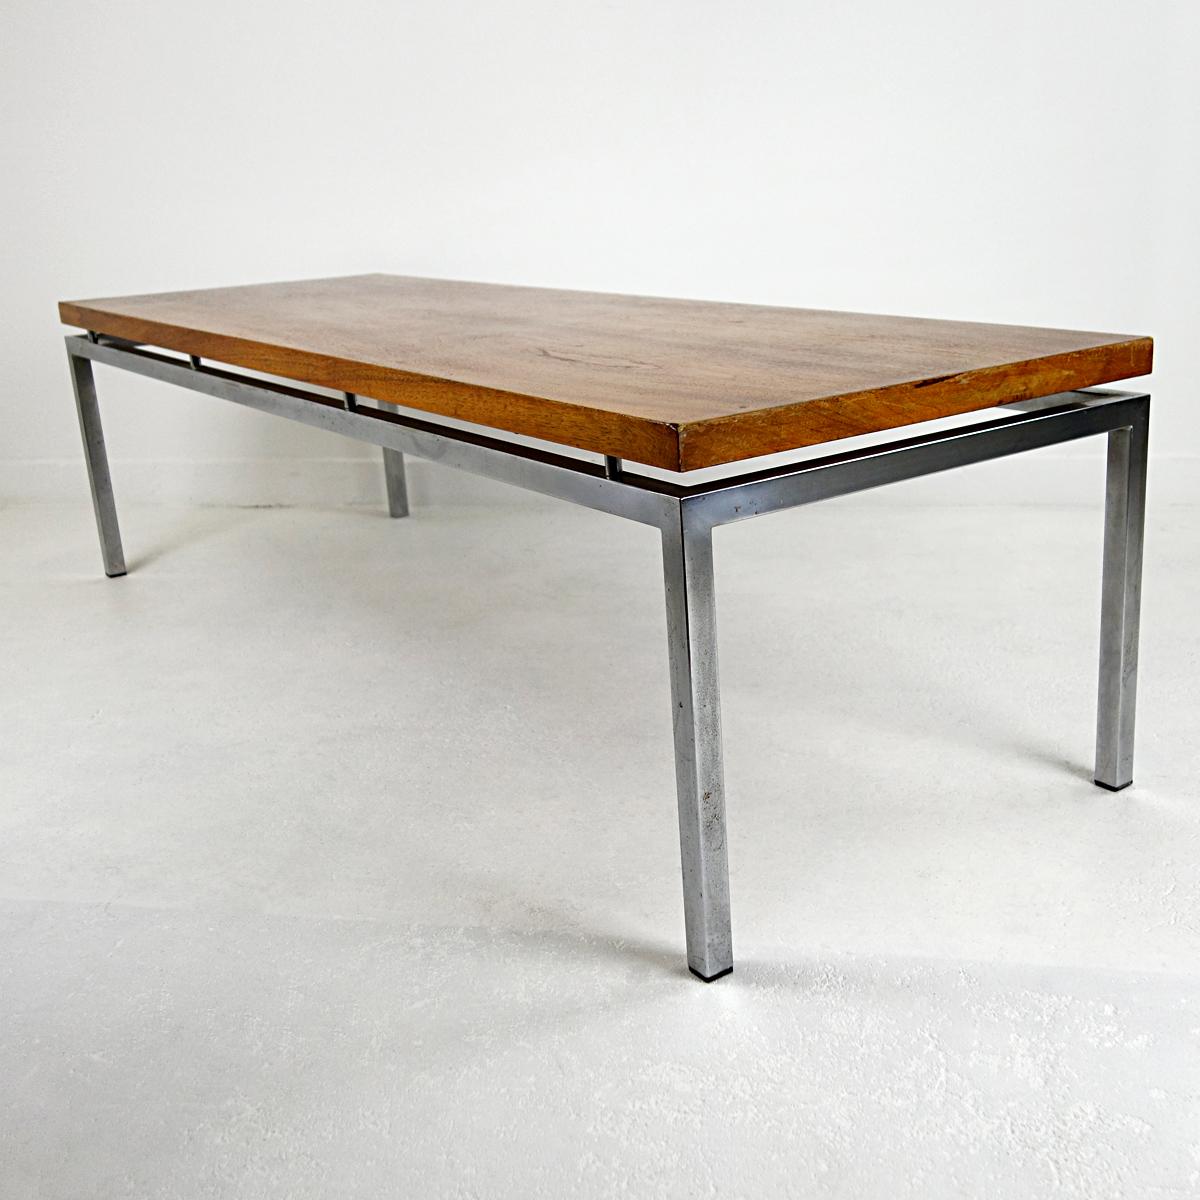 Dutch Long Midcentury Coffee Table with Chrome Frame and Teak Wood Top For Sale